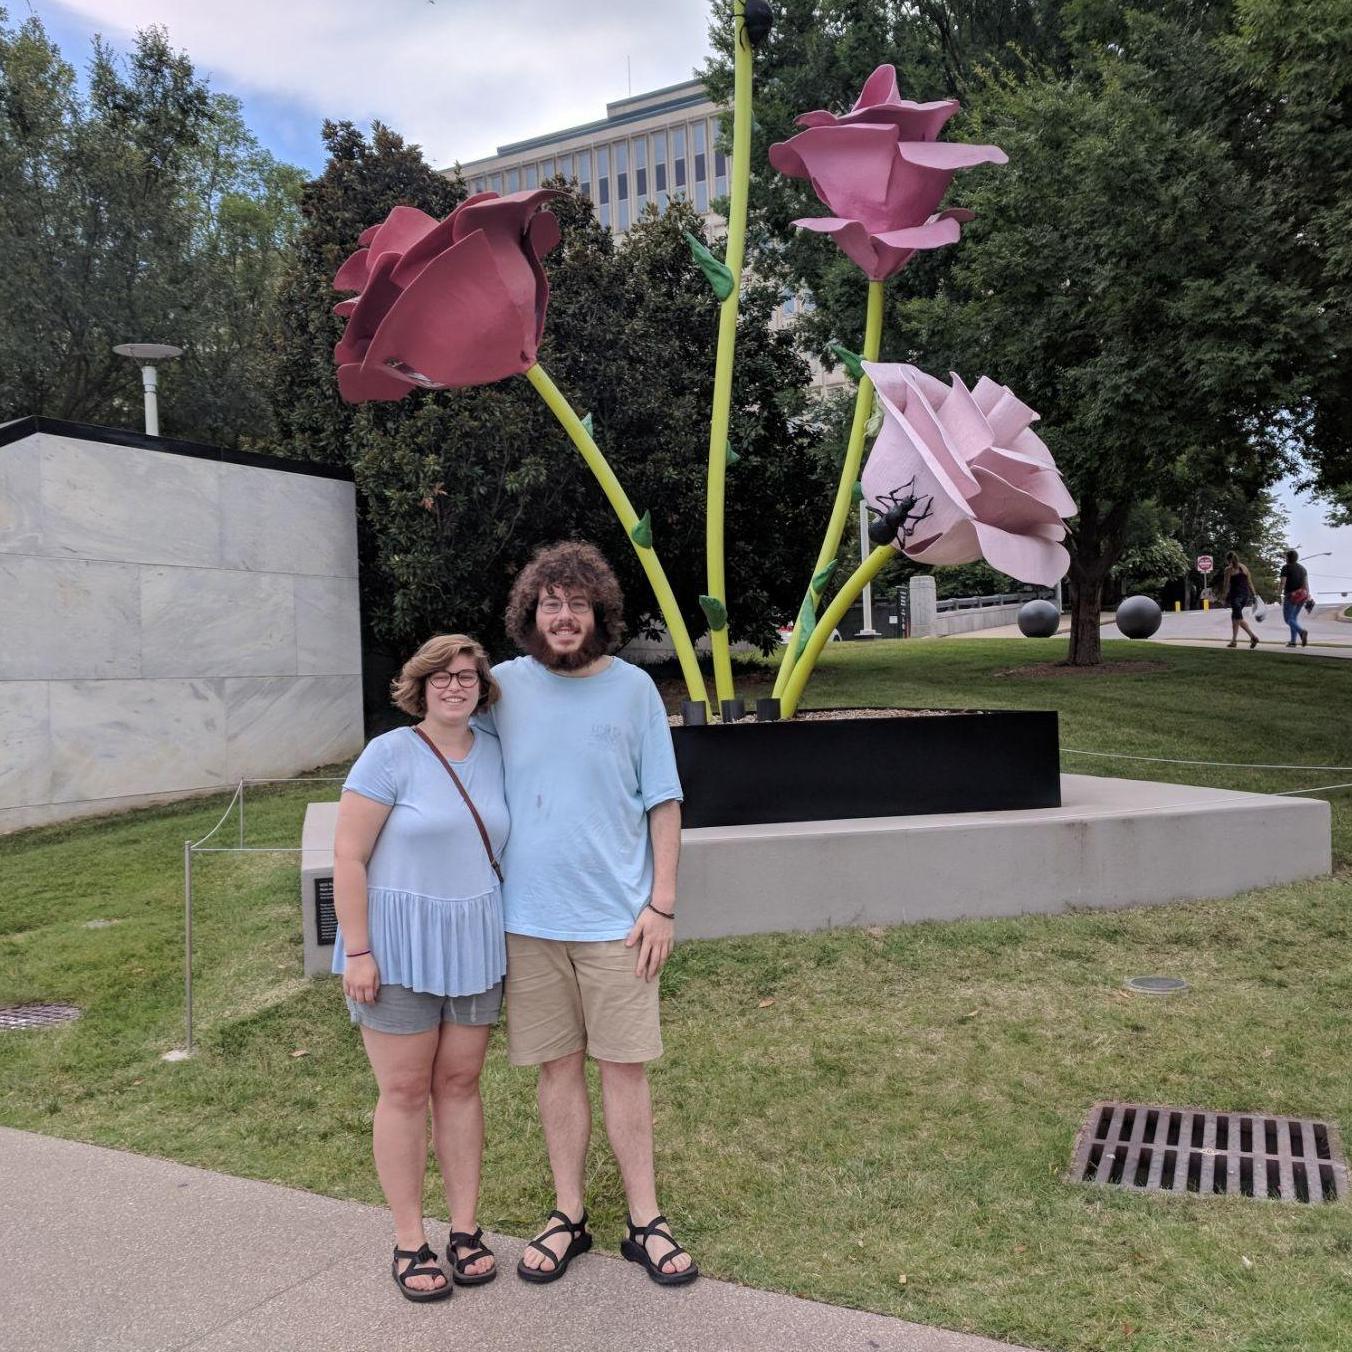 Apartment searching in Nashville wasn't complete without a trip to an Art Museum, July 2018